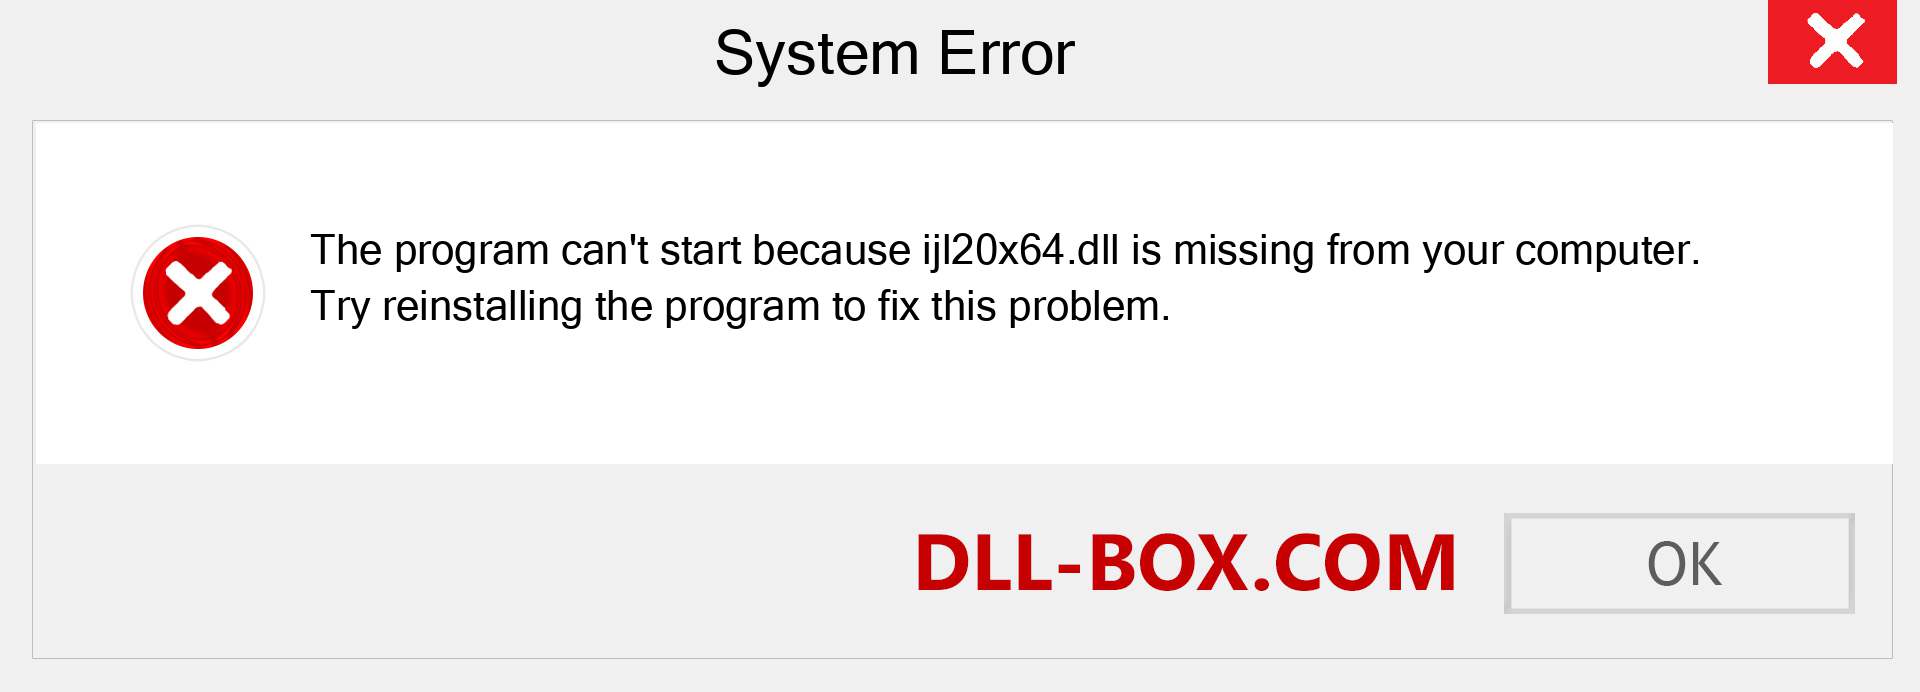  ijl20x64.dll file is missing?. Download for Windows 7, 8, 10 - Fix  ijl20x64 dll Missing Error on Windows, photos, images